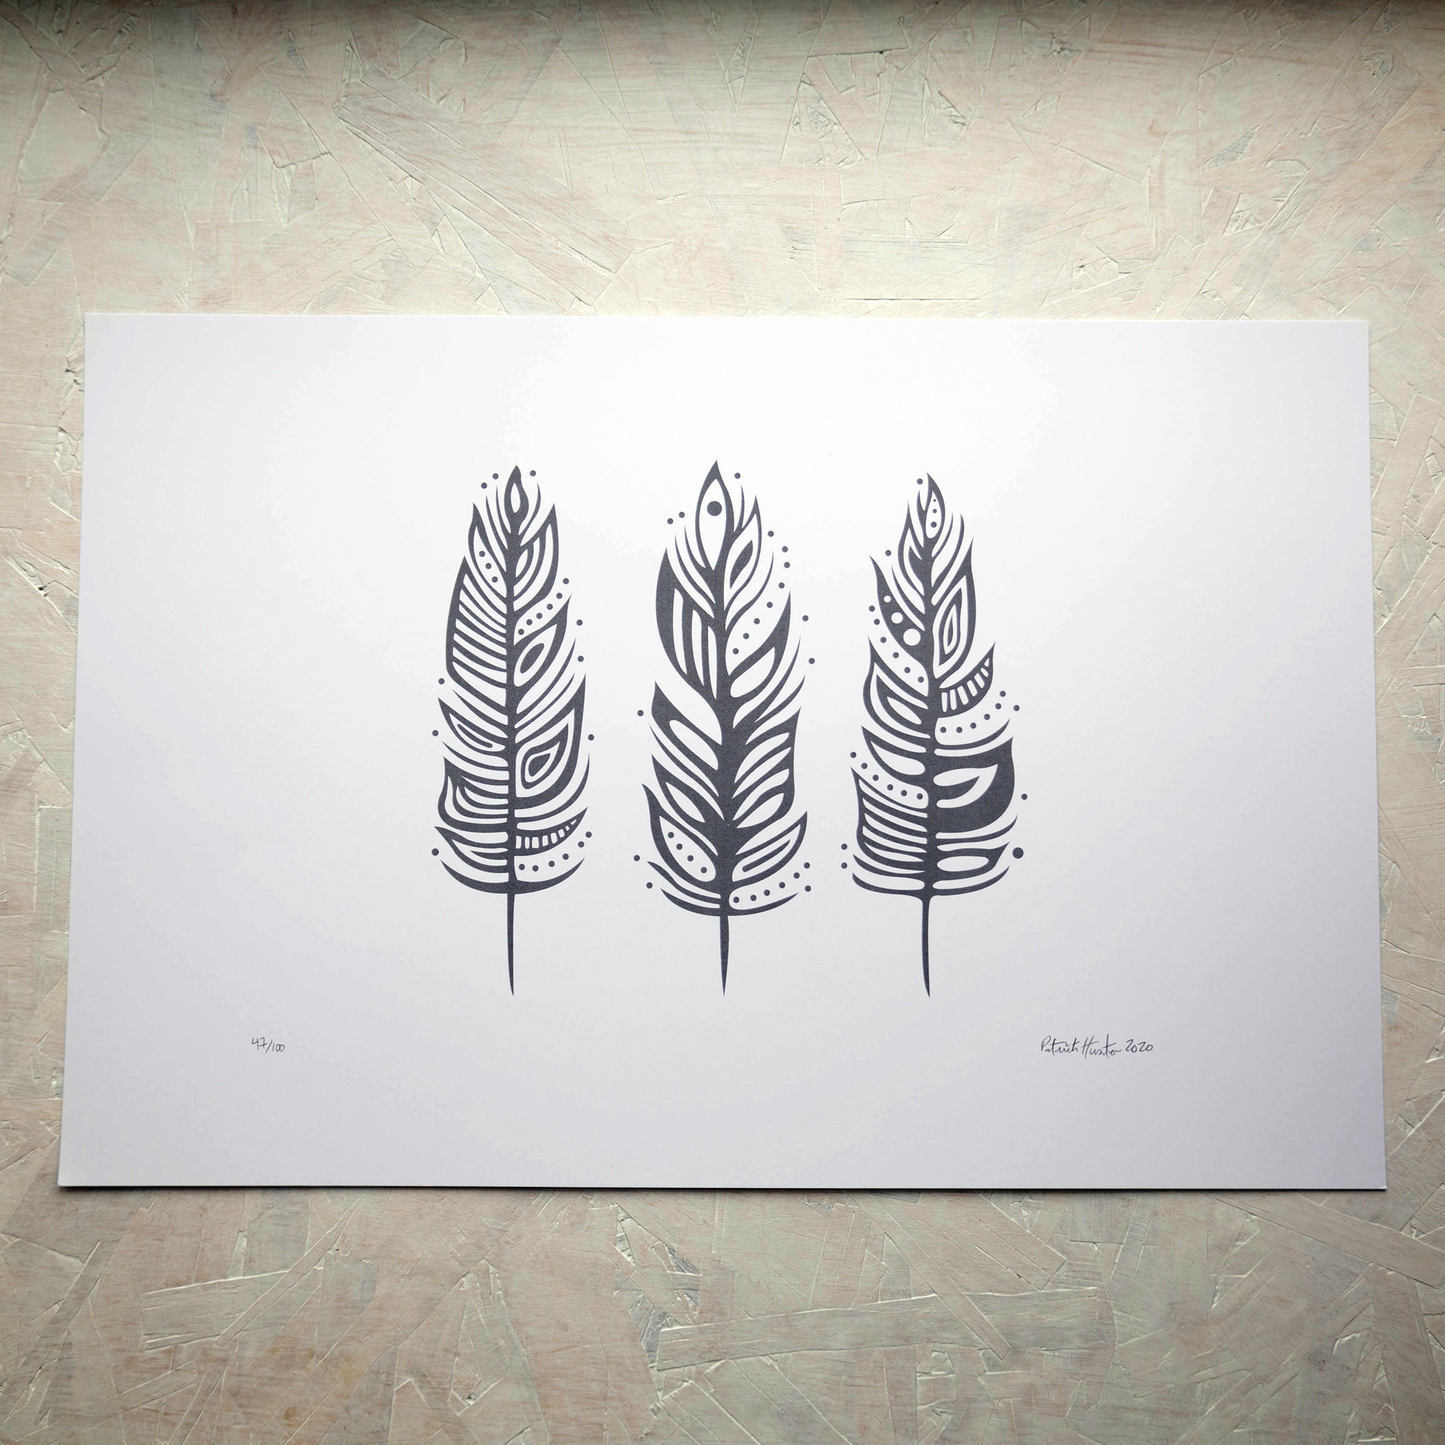 Print of Patrick Hunter's painting of three feathers, grey on white, woodland art style.